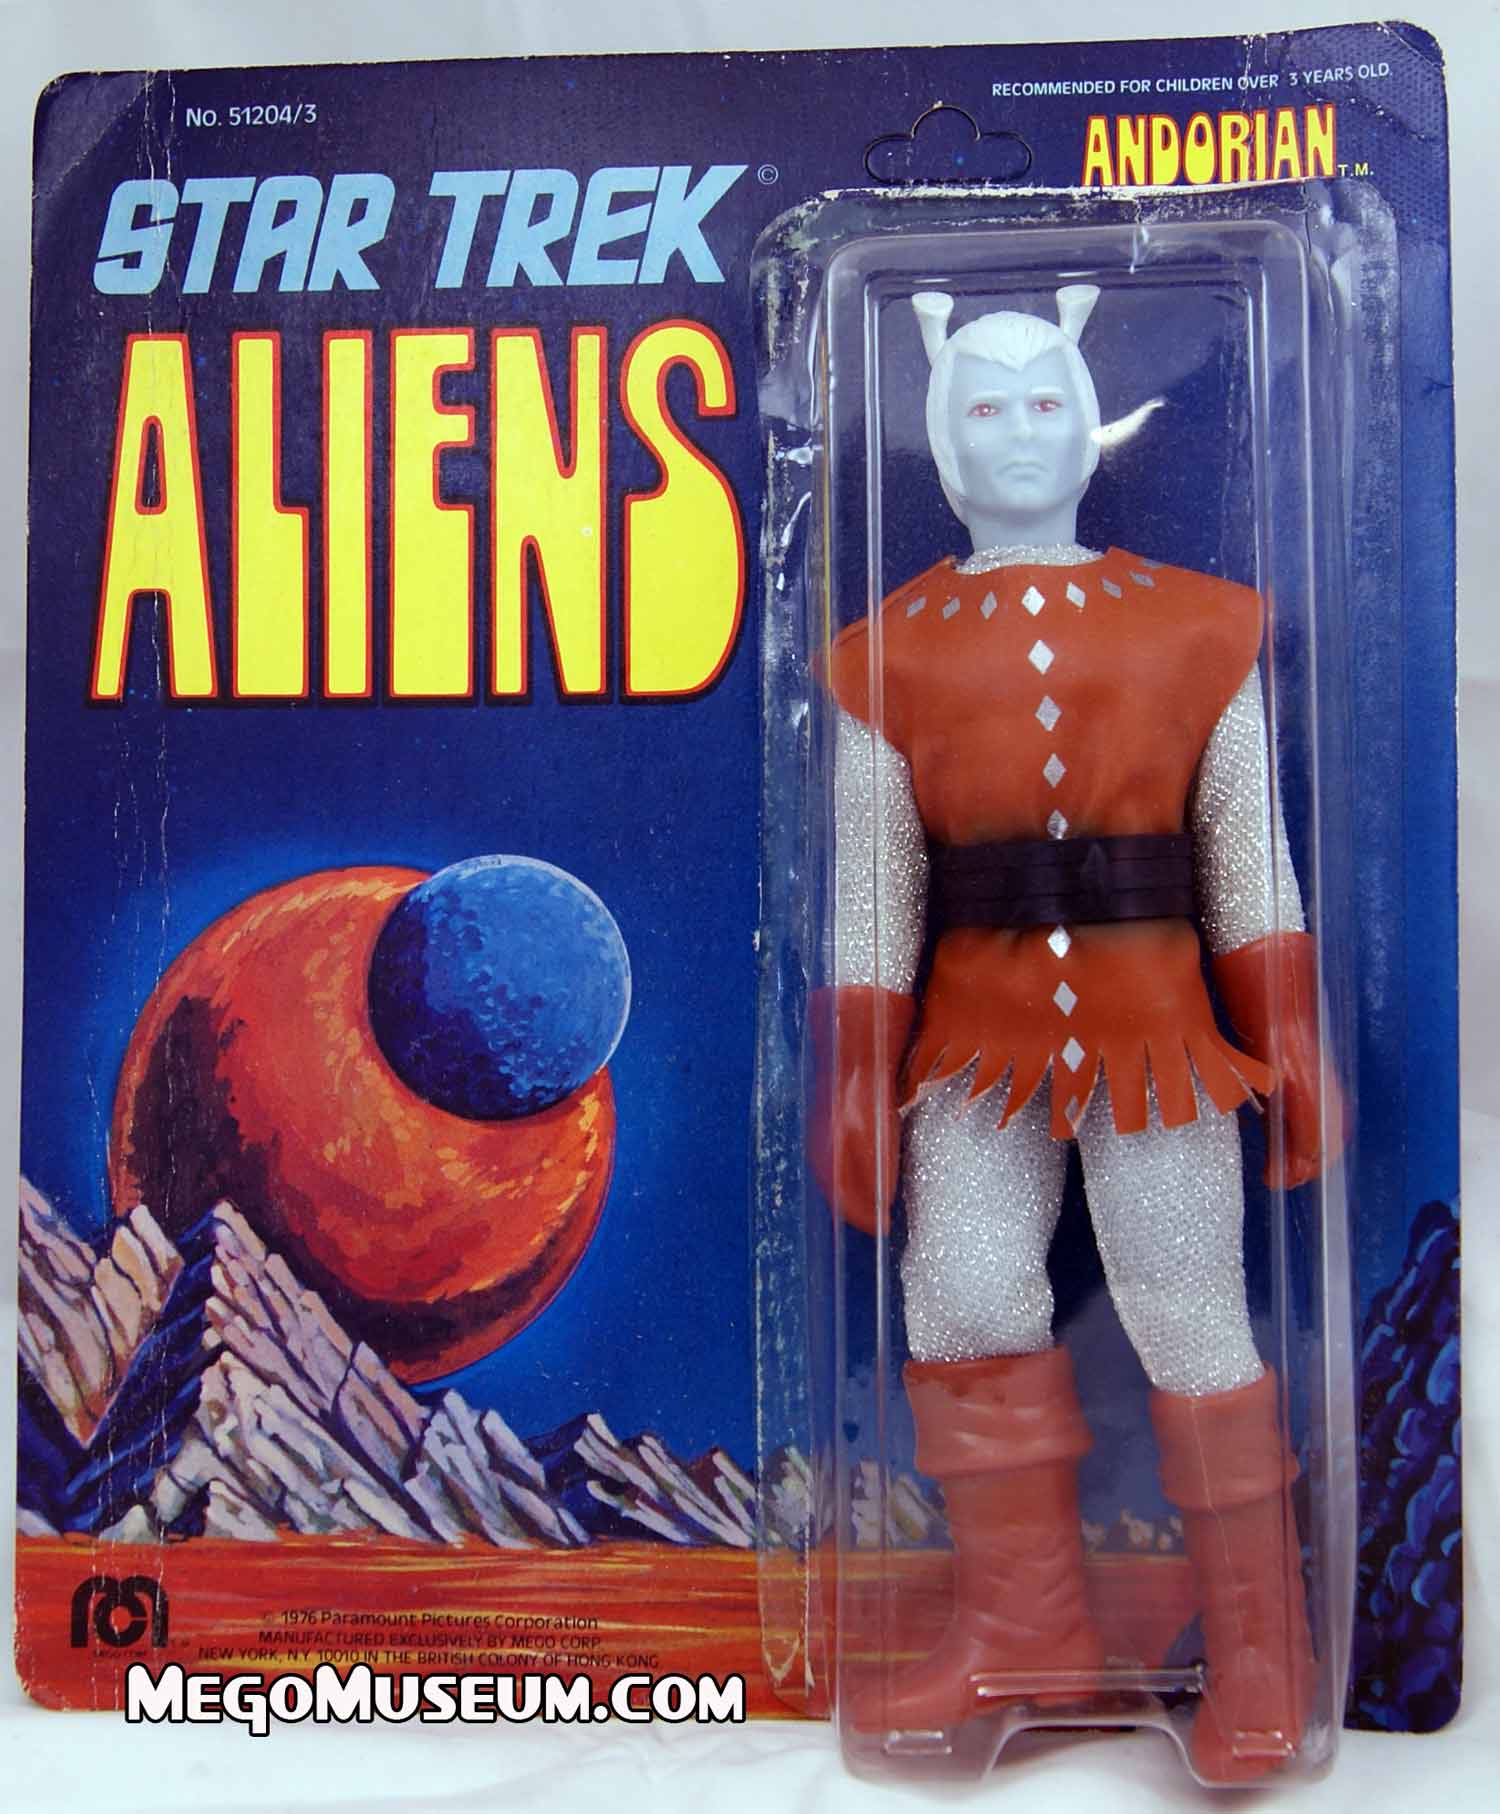 Mego Carded Second Series Andorian